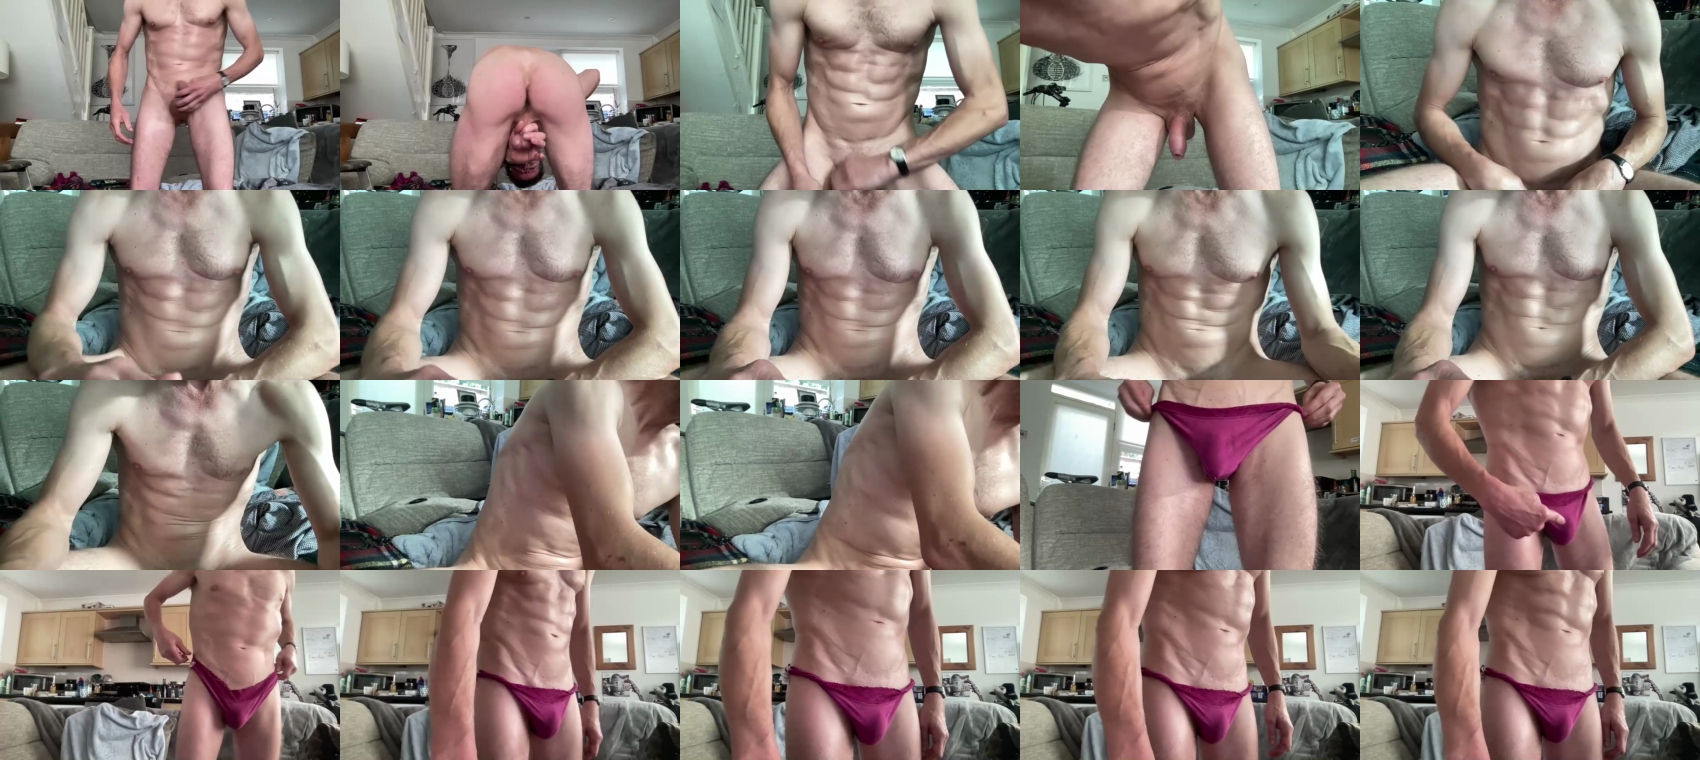 a_grower_and_shower Video Webcam SHOW @ Chaturbate 09-08-2023